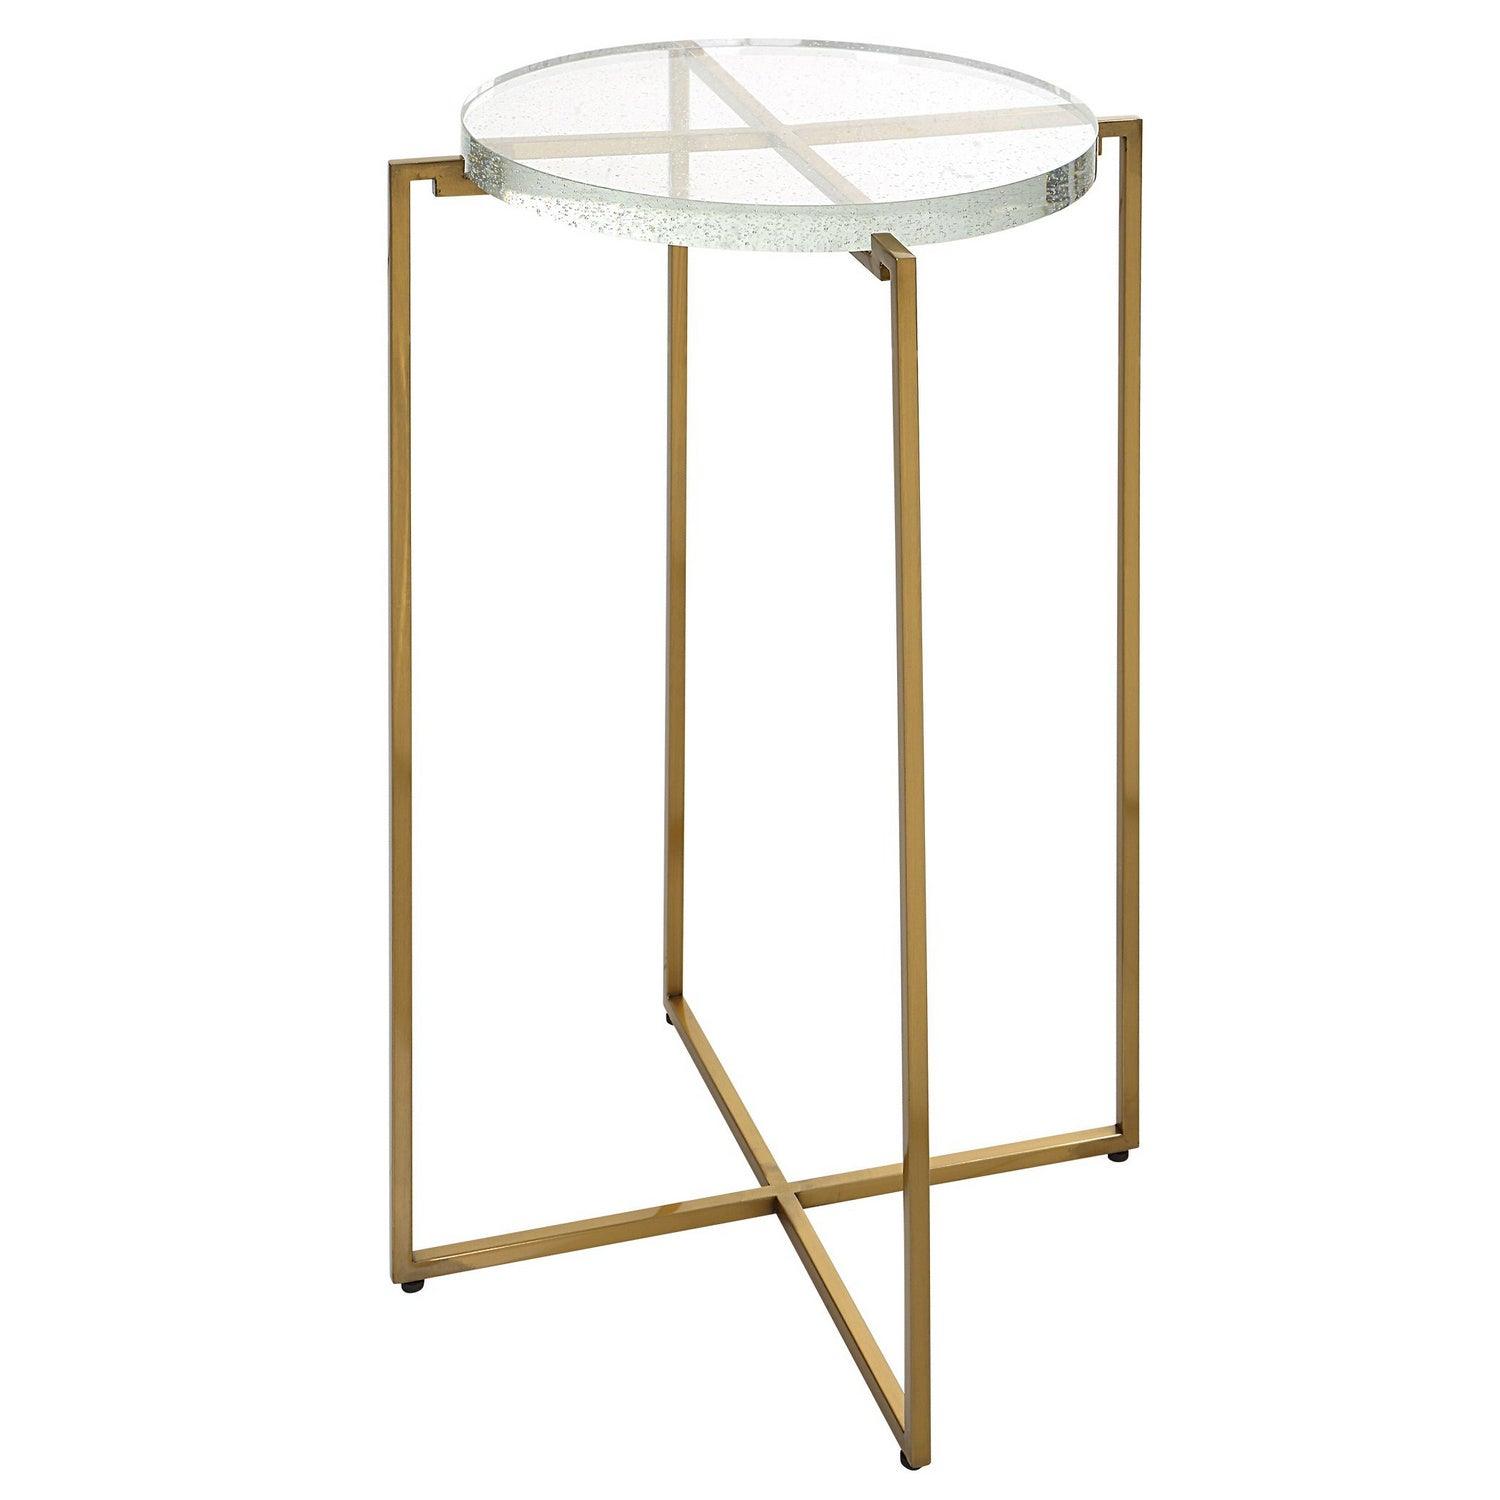 The Uttermost - Star-crossed Accent Table - 25226 | Montreal Lighting & Hardware